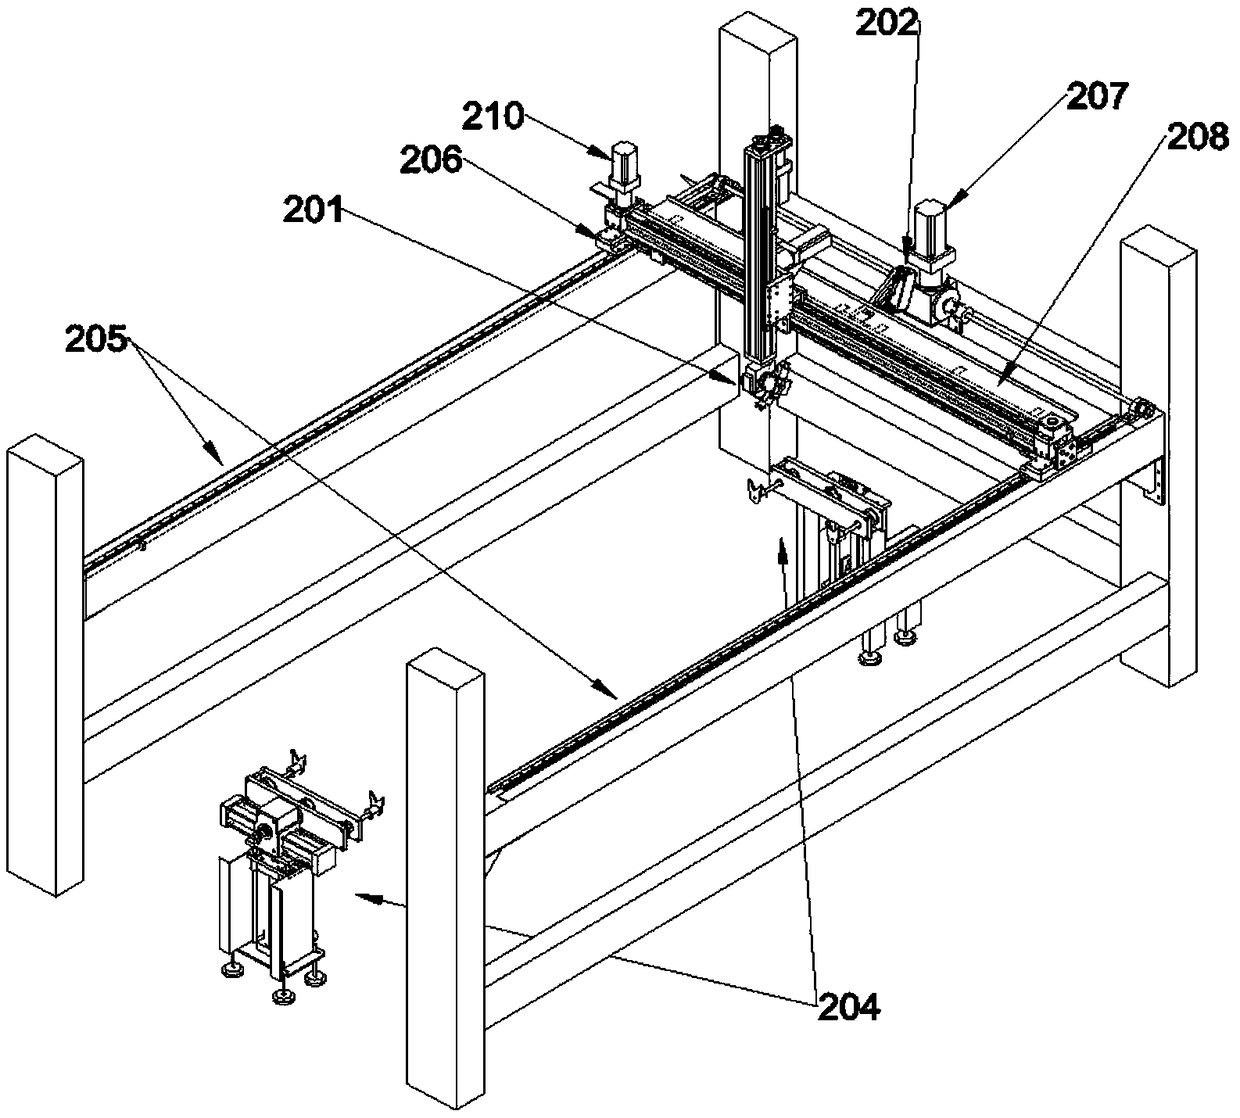 Full-automatic door panel painting equipment and method